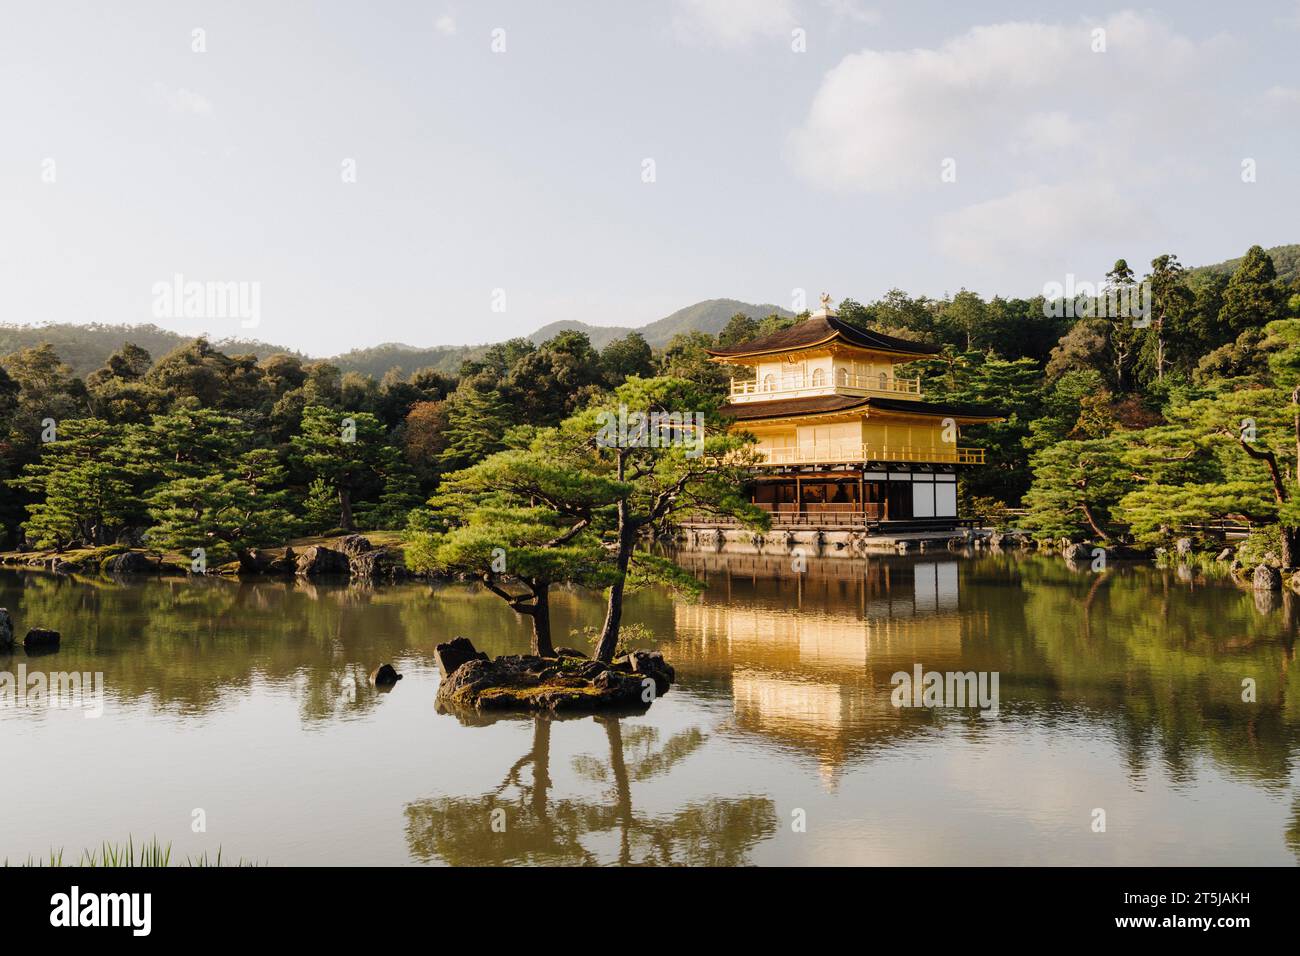 Kinkaku-ji temple with gold-leaf facade in front of a reflective pond. Kyoto, Japan. Stock Photo